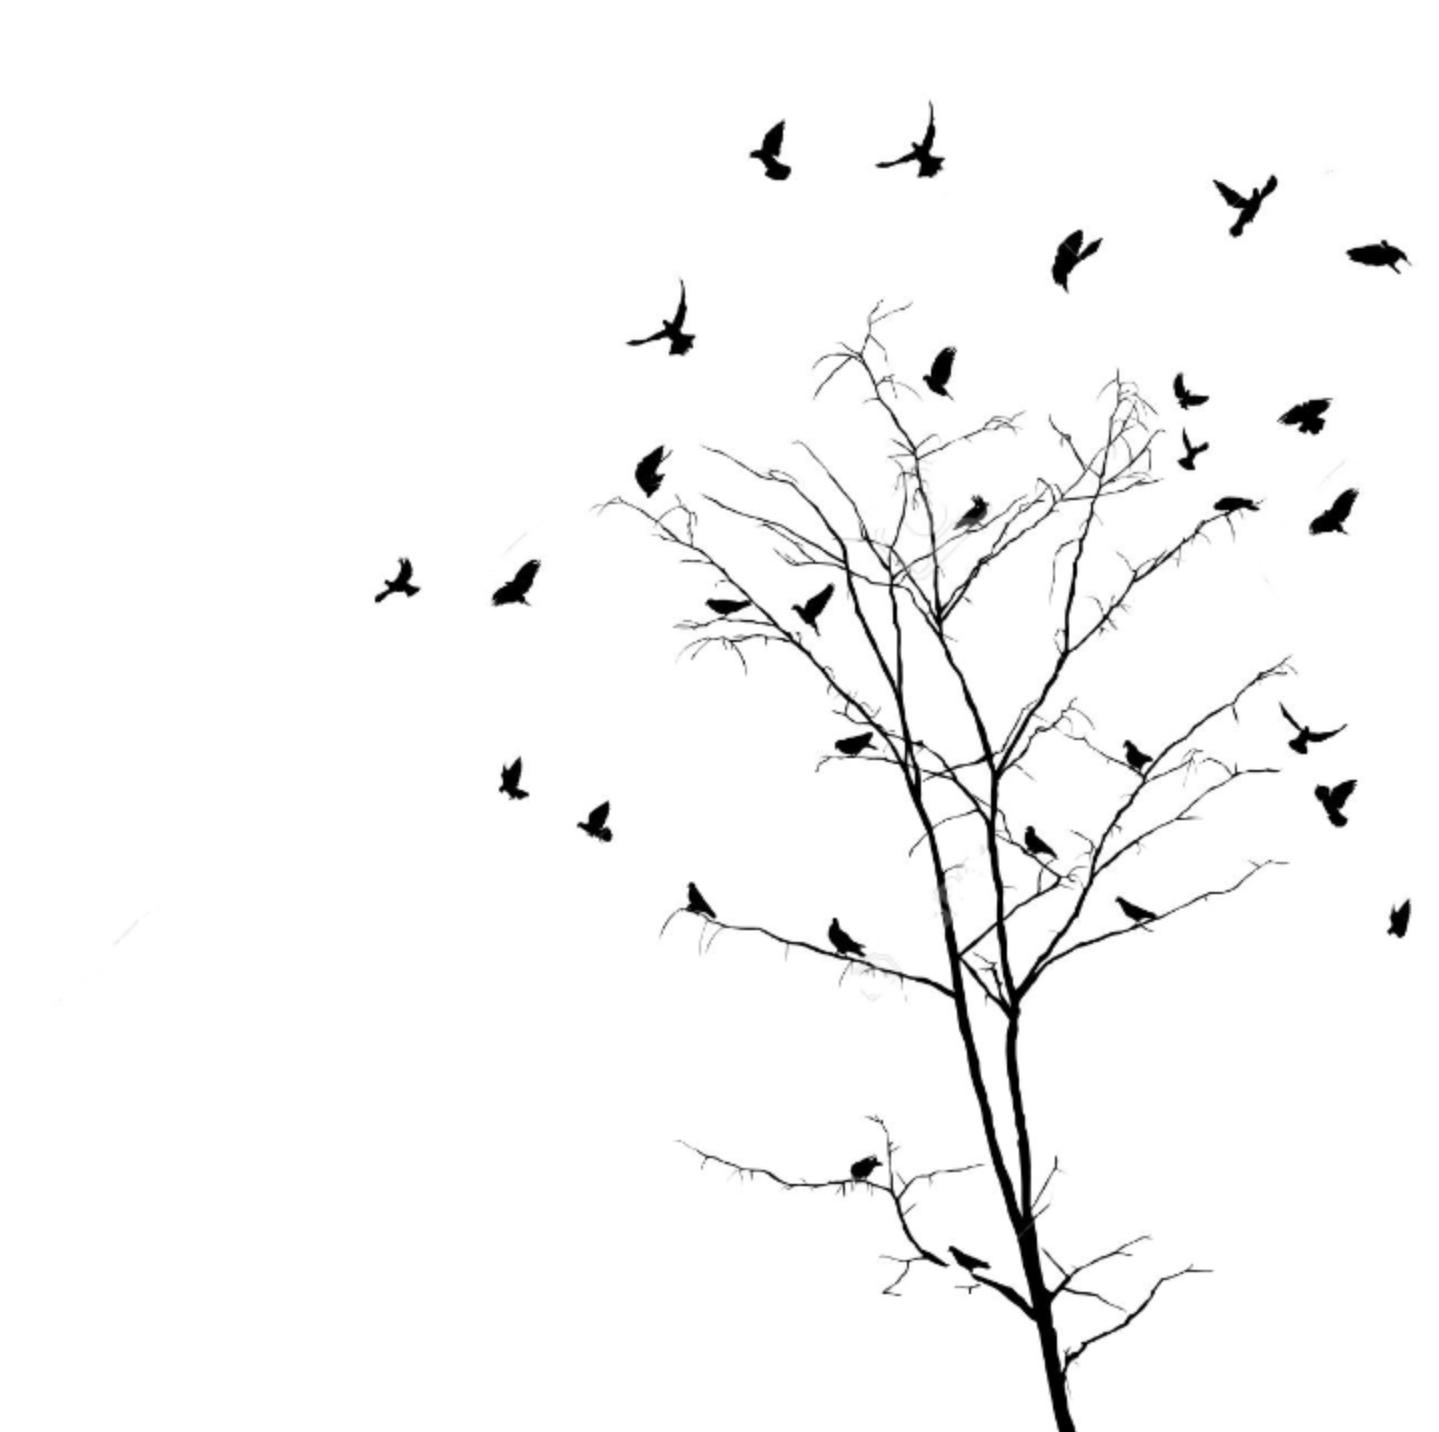 Sparrows flying out of tree